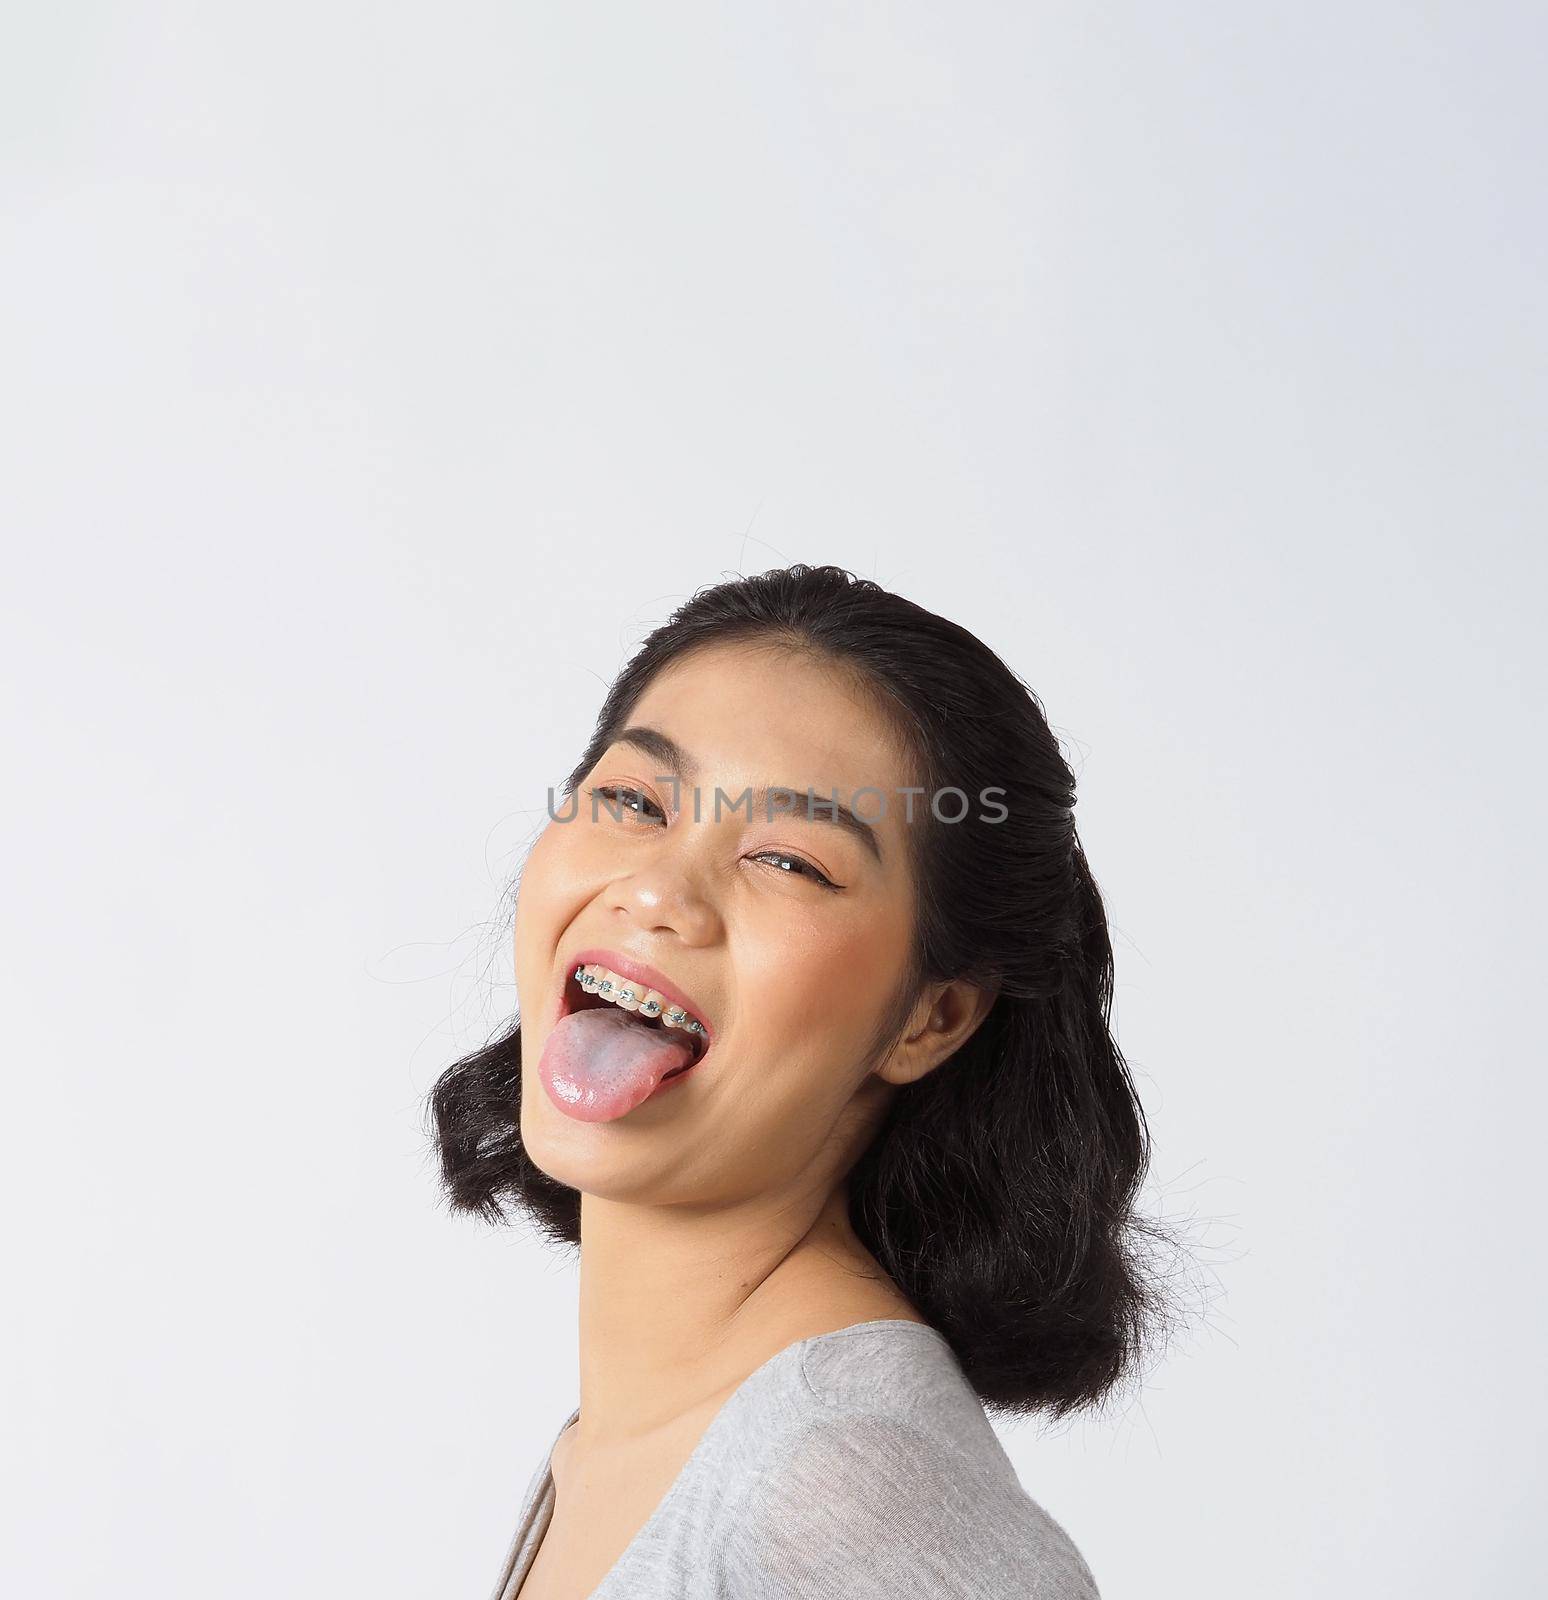 Dental brace beautiful girl smiling looking on a camera. white teeth with blue braces. Dental care. Asian teen woman smile with orthodontic accessories. Cosmetic dentistry, orthodontics treatment. white background studio.